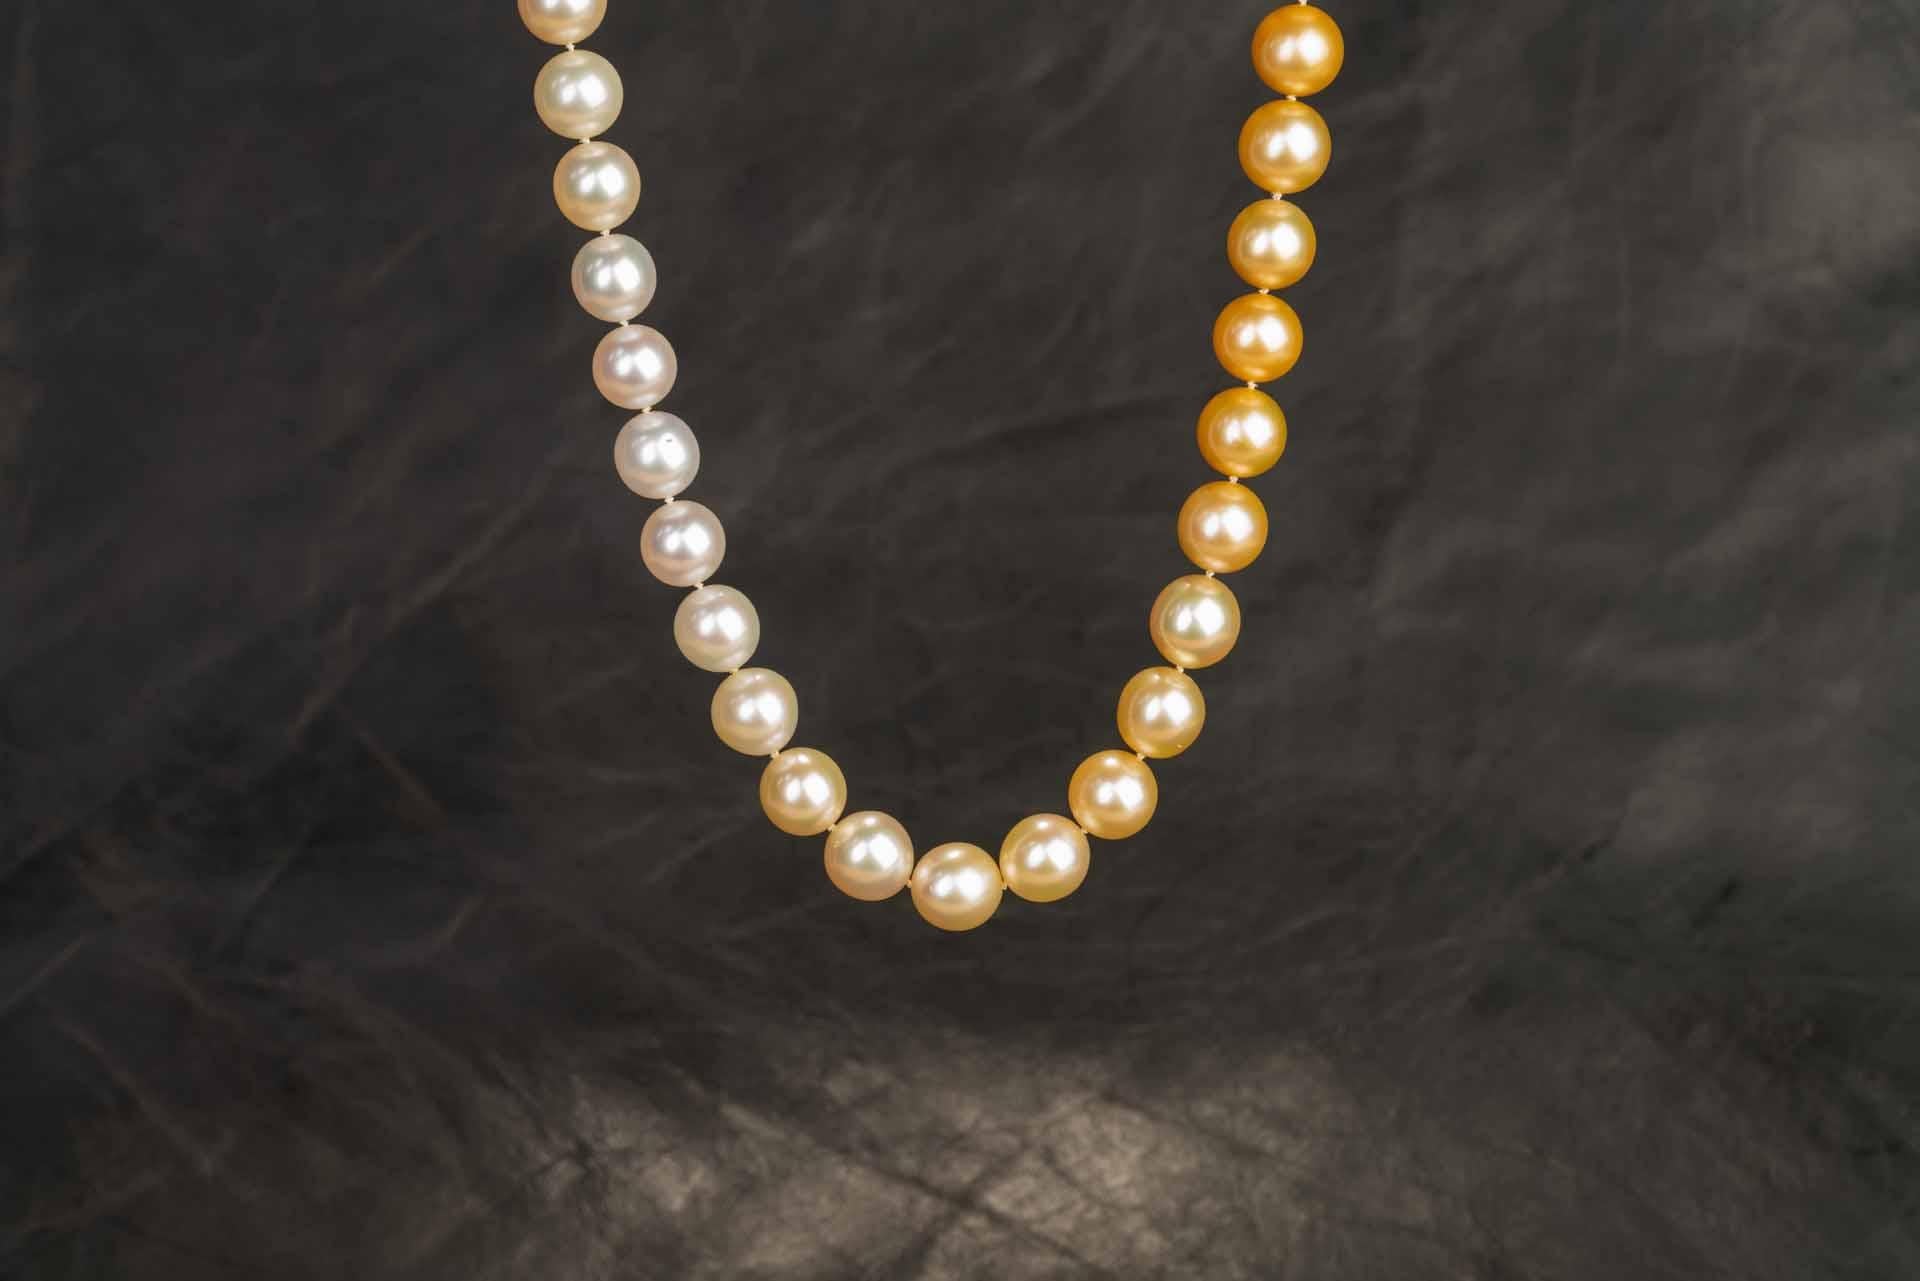 A strand of 11-13mm multicolor white to golden ombréd Jewelmer South Sea pearls, 24.5in in length. This strand is fitted with 18k yellow gold interchangeable clasp parts that enable them to be worn as a seamless strand of pearls or with a 